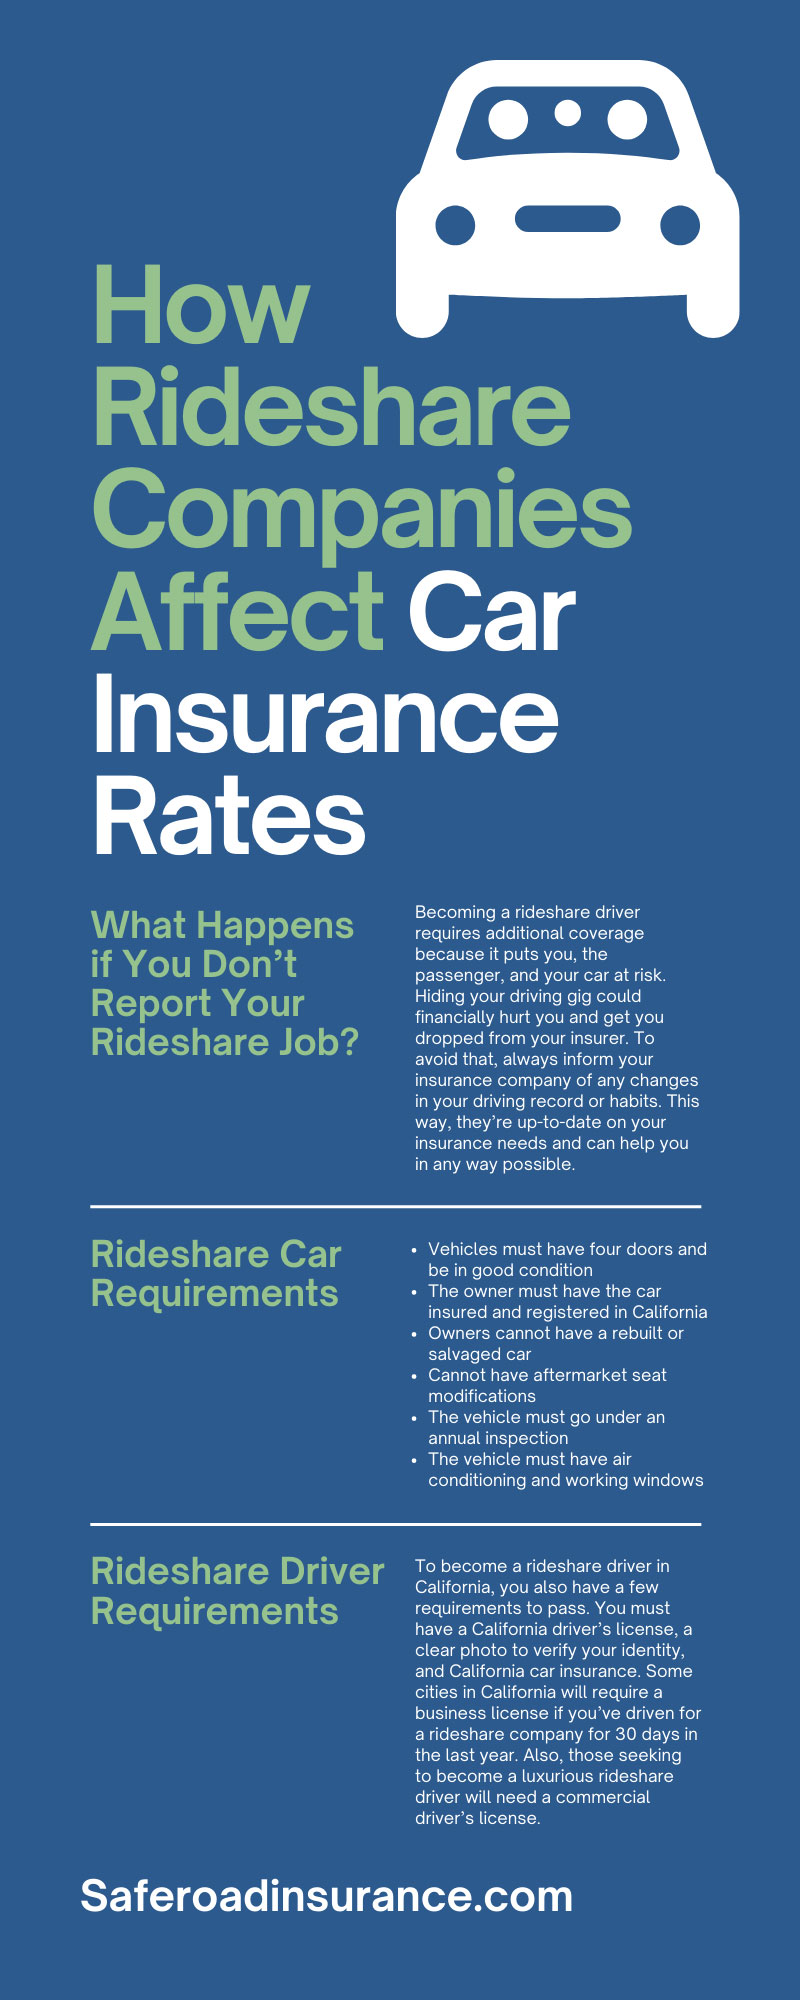 How Rideshare Companies Affect Car Insurance Rates